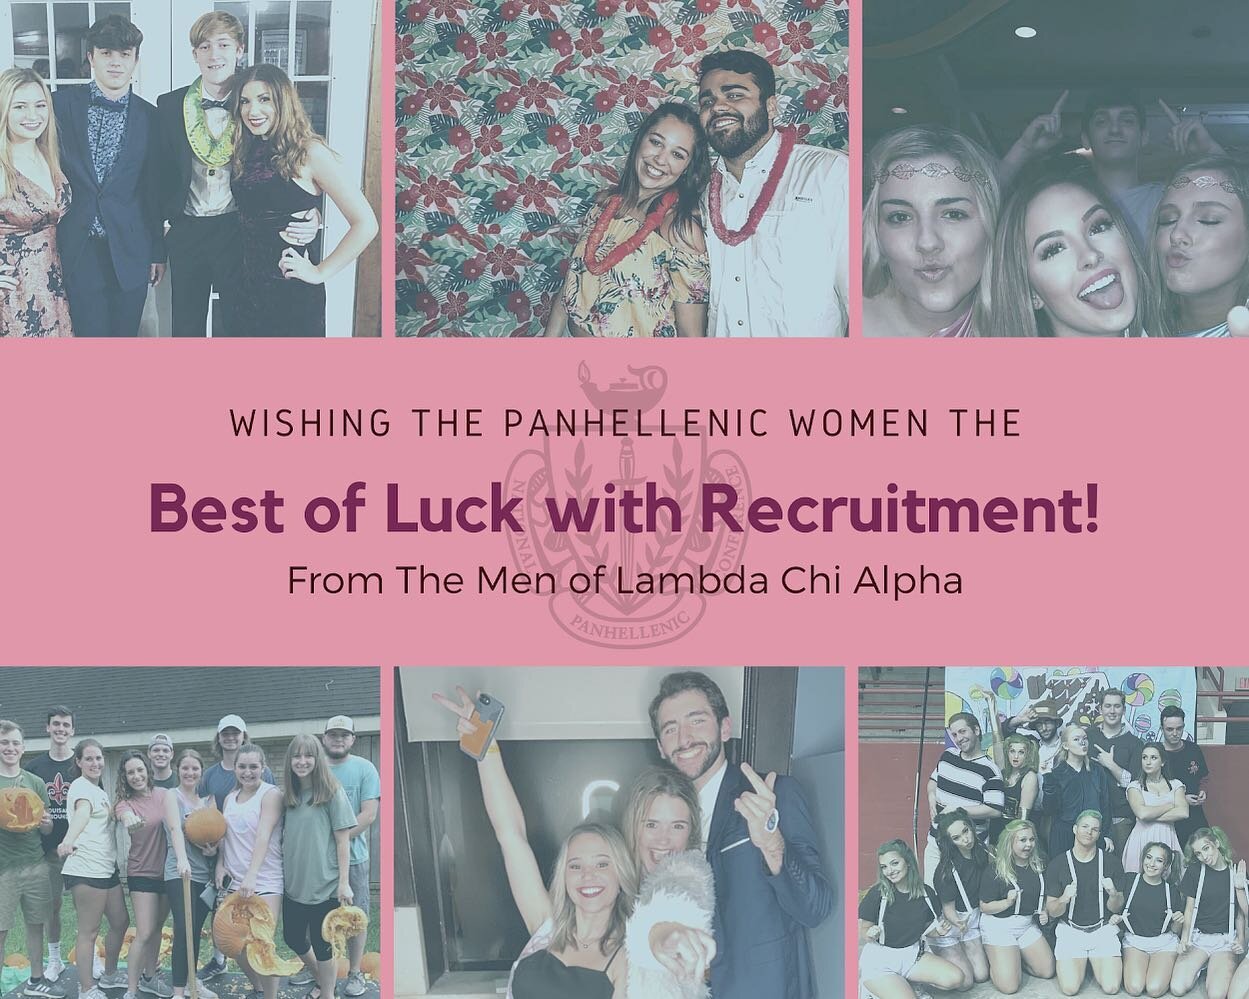 We know this year has presented us all with many challenges, but we&rsquo;re confident y&rsquo;all will help many young women find their new homes. The Men of Lambda Chi wish you all the best of luck with recruitment!